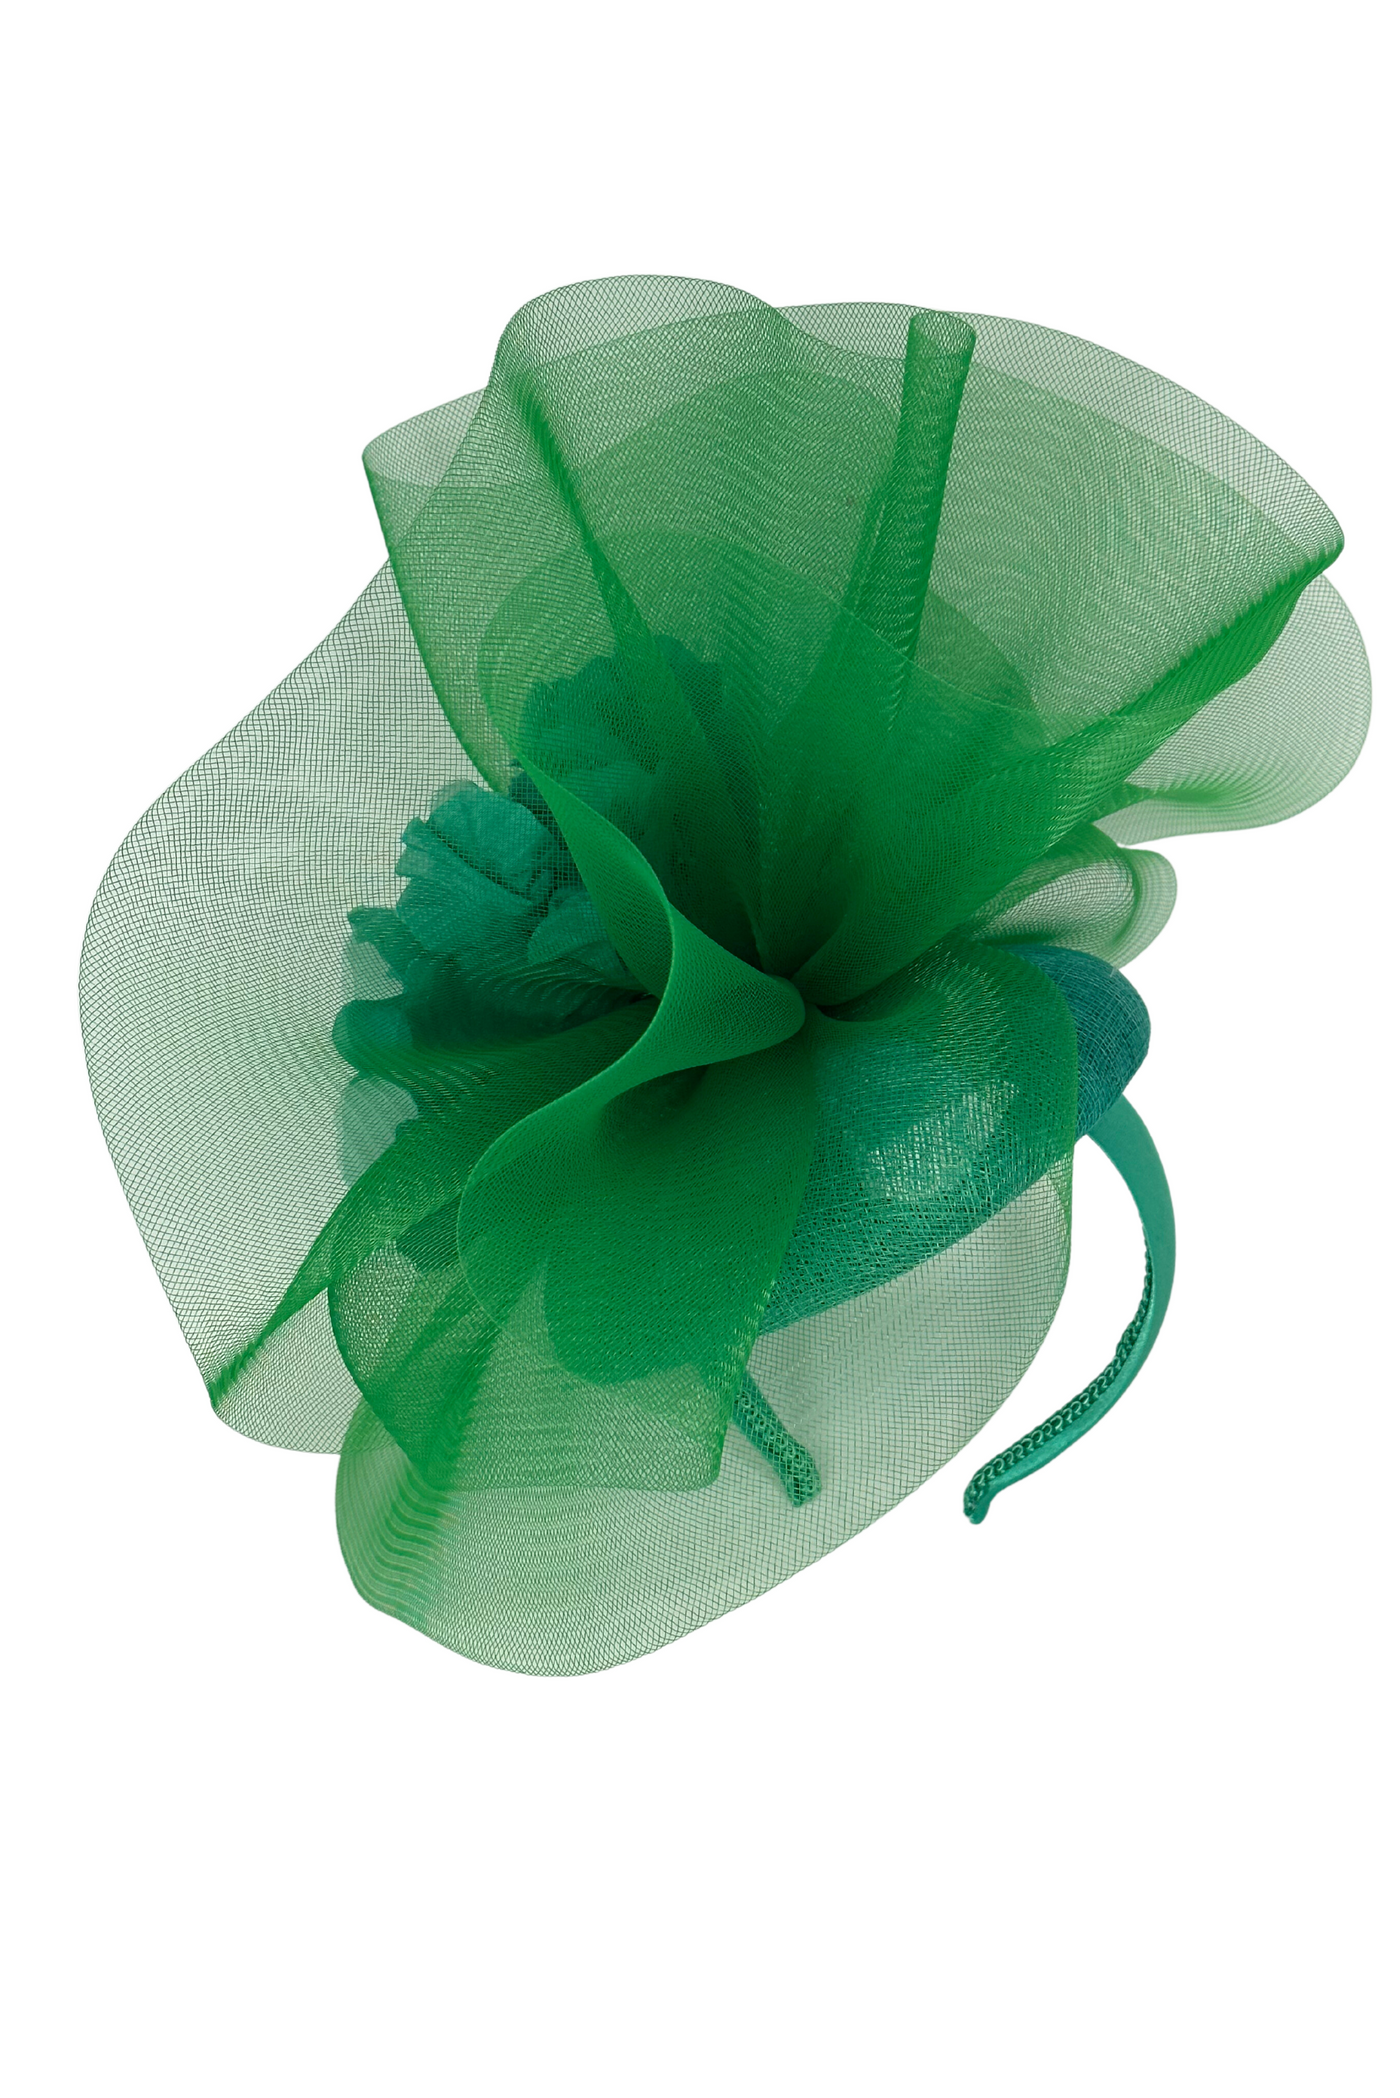 Shamrock Pillbox Headpiece With Mesh And Flower Detail